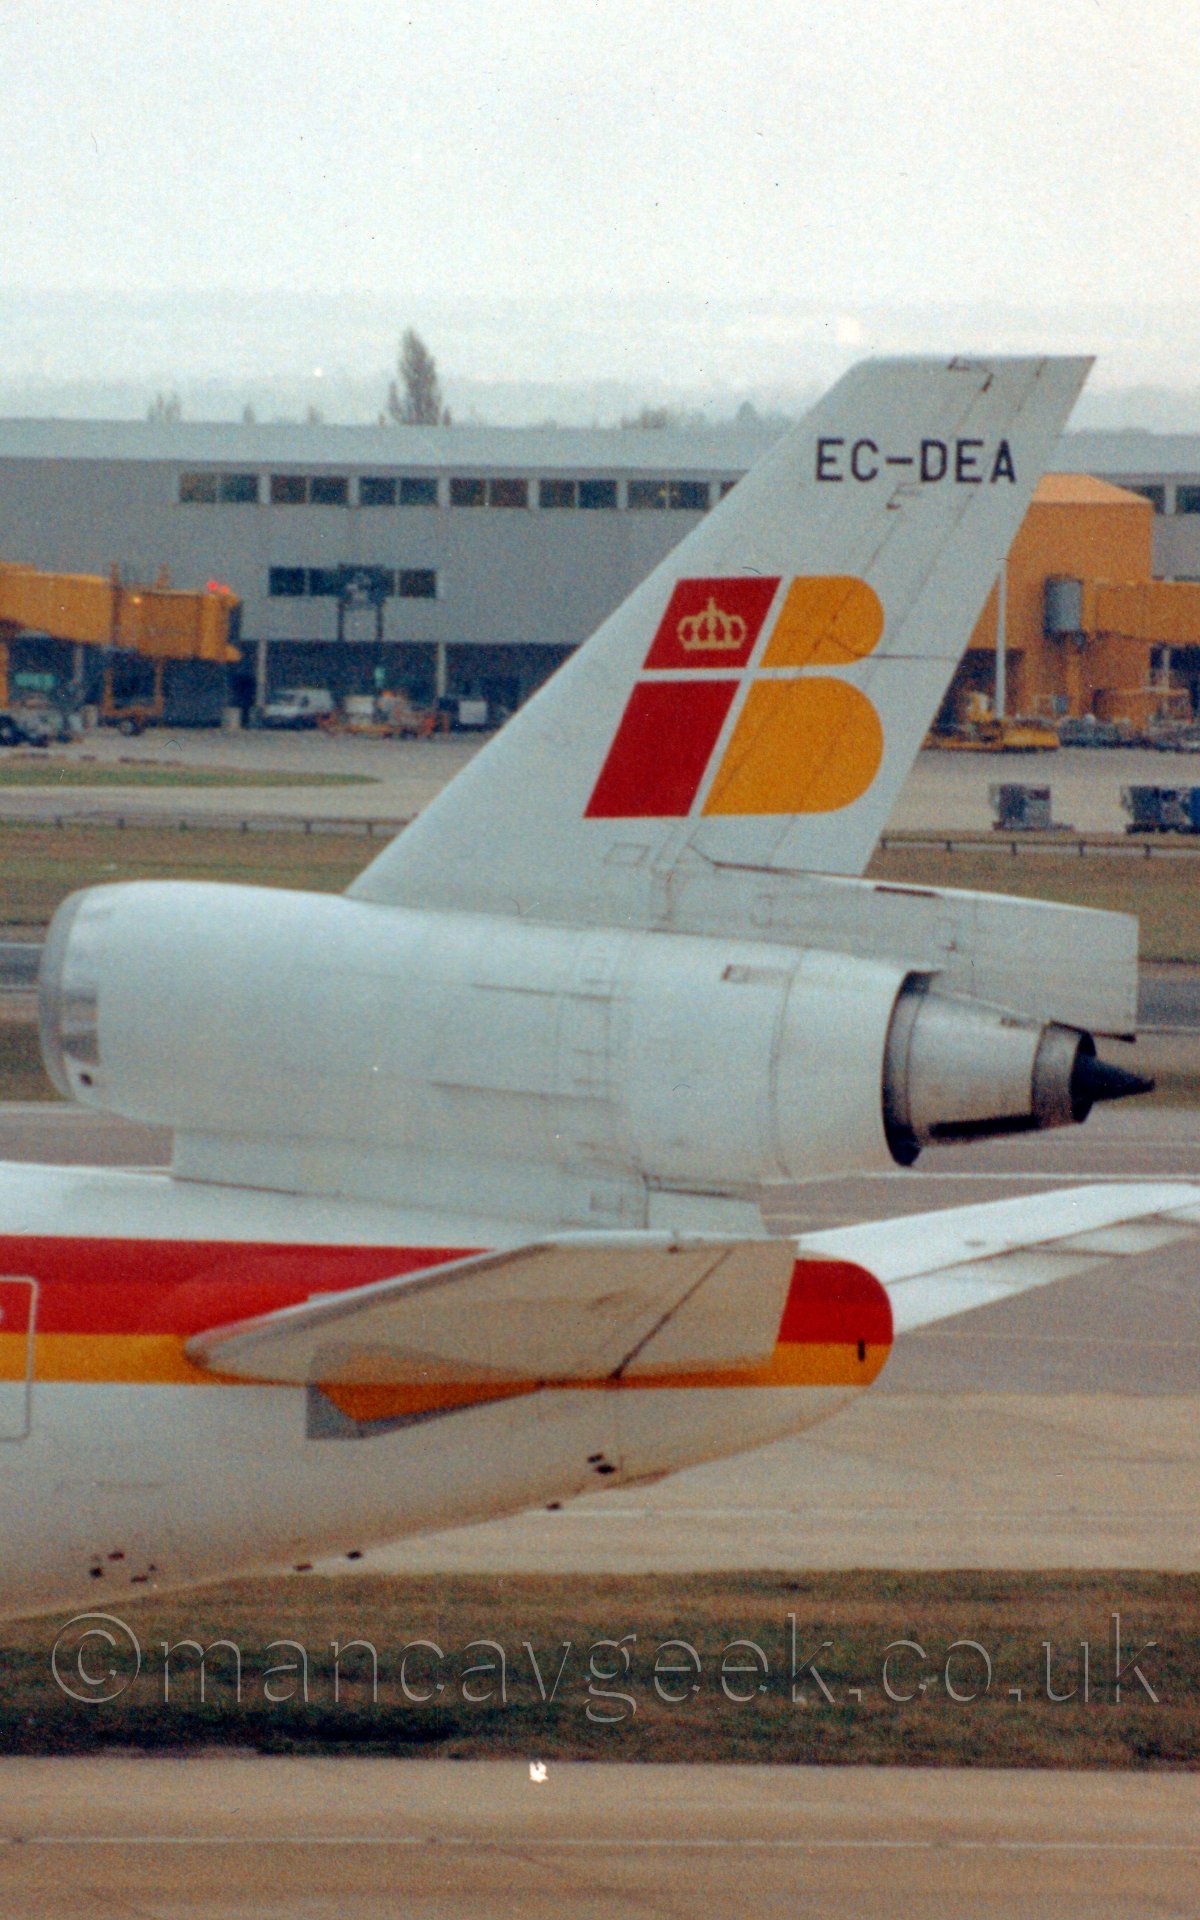 Close up of the white, yellow, and orange rear fuselage and tail of a 3 engined jet airliner taxiing from right to left, under a bright but hazy grey sky.